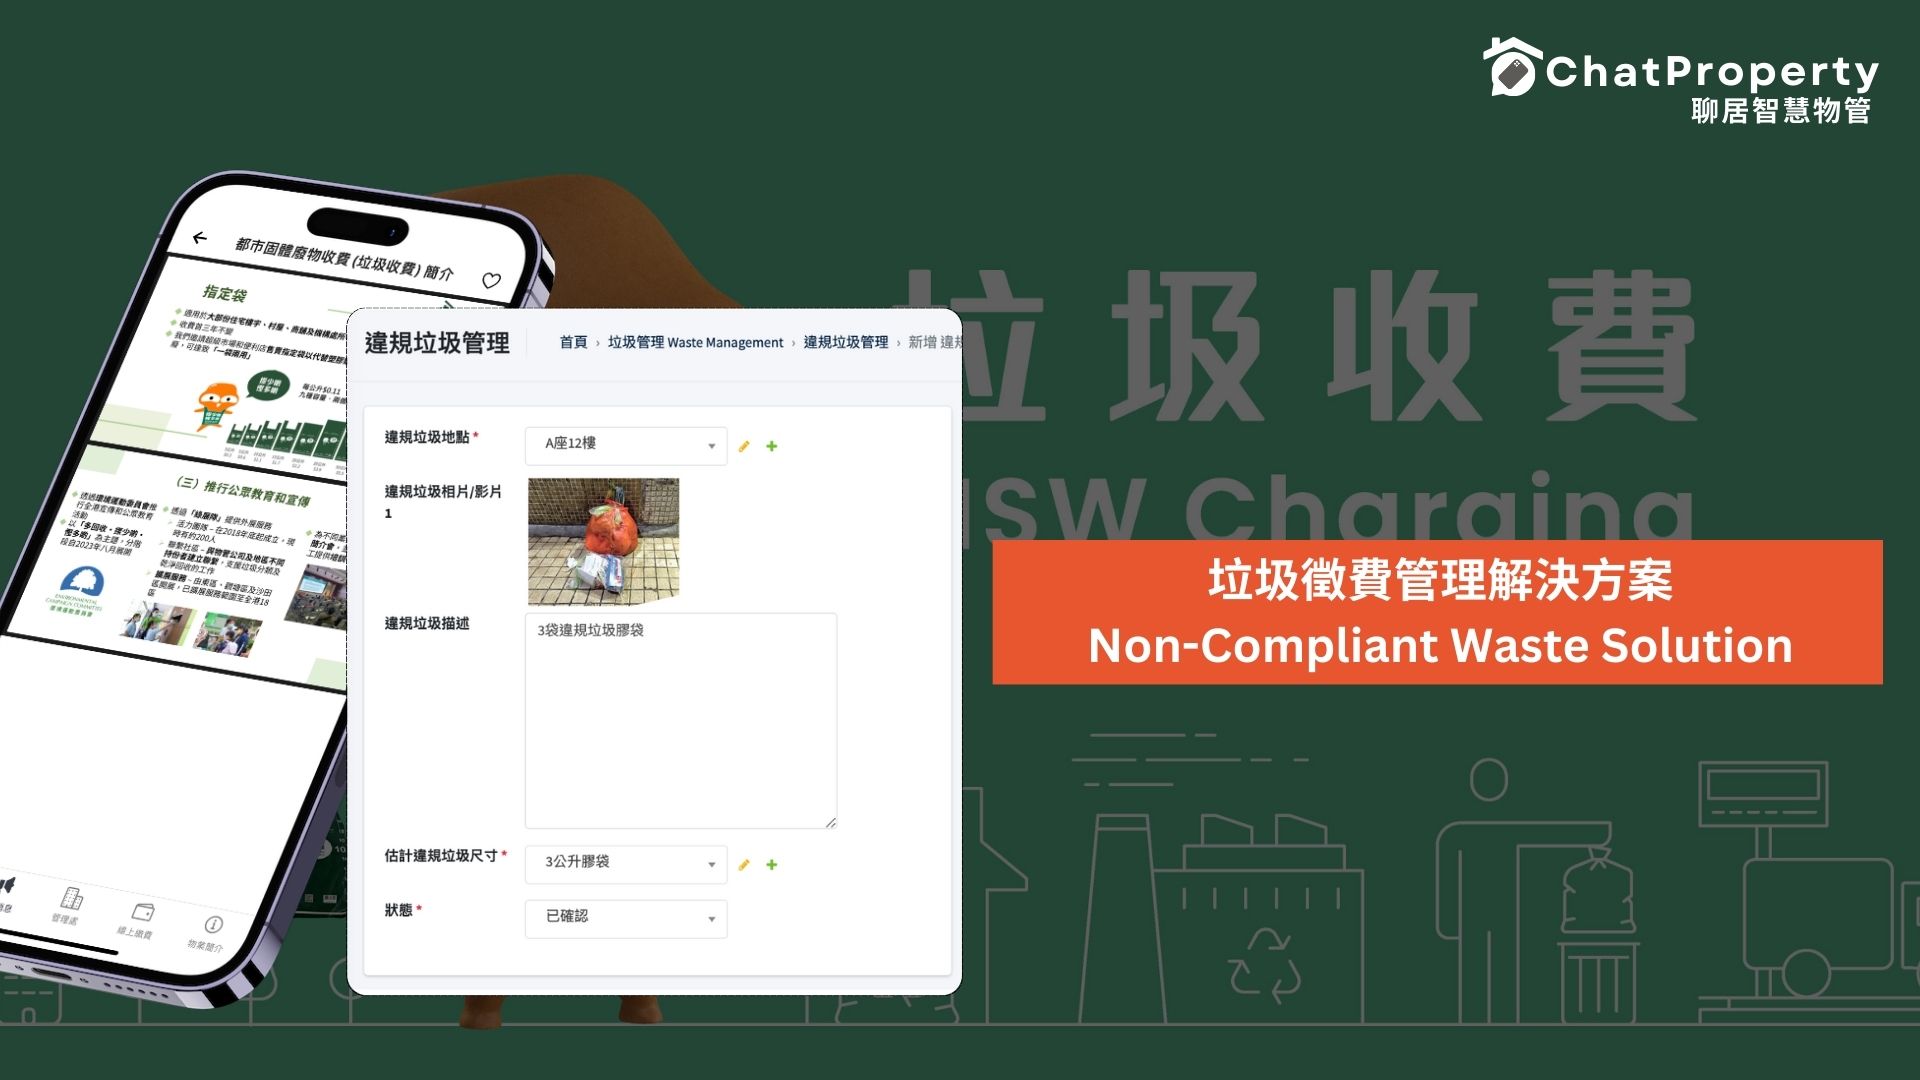 ChatProperty MSW Charging Solution